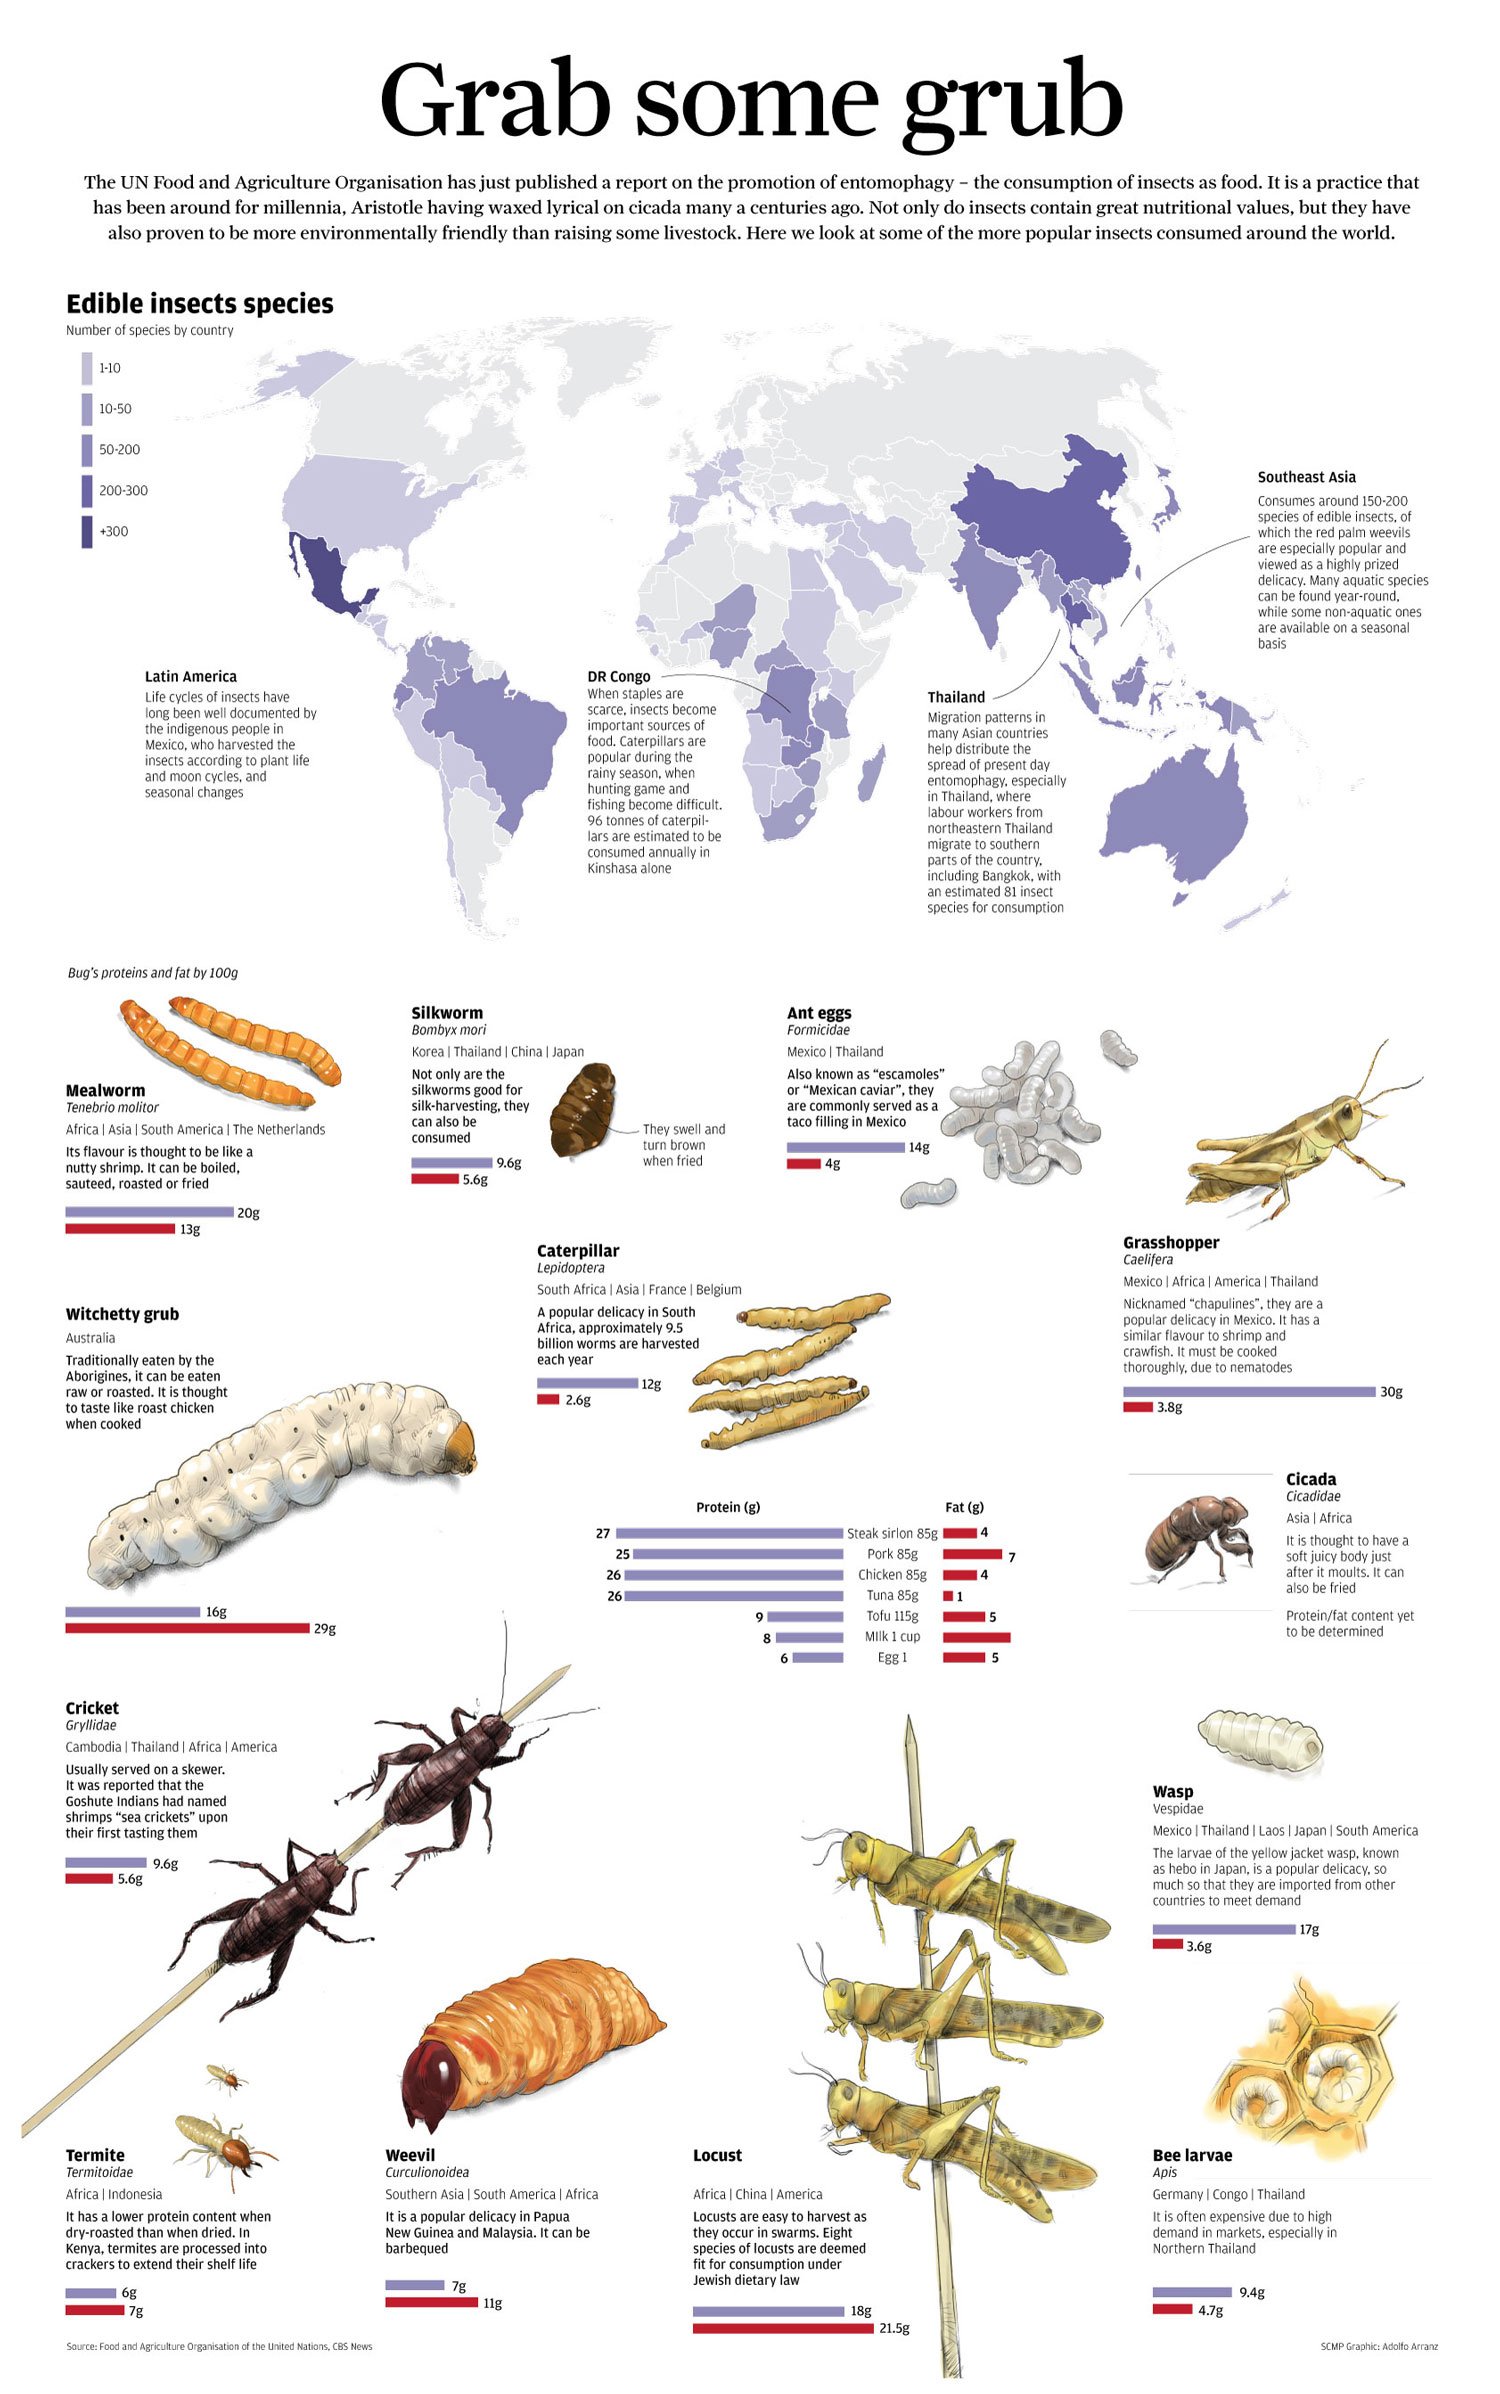 Entomophagy, the consumption of insects as food